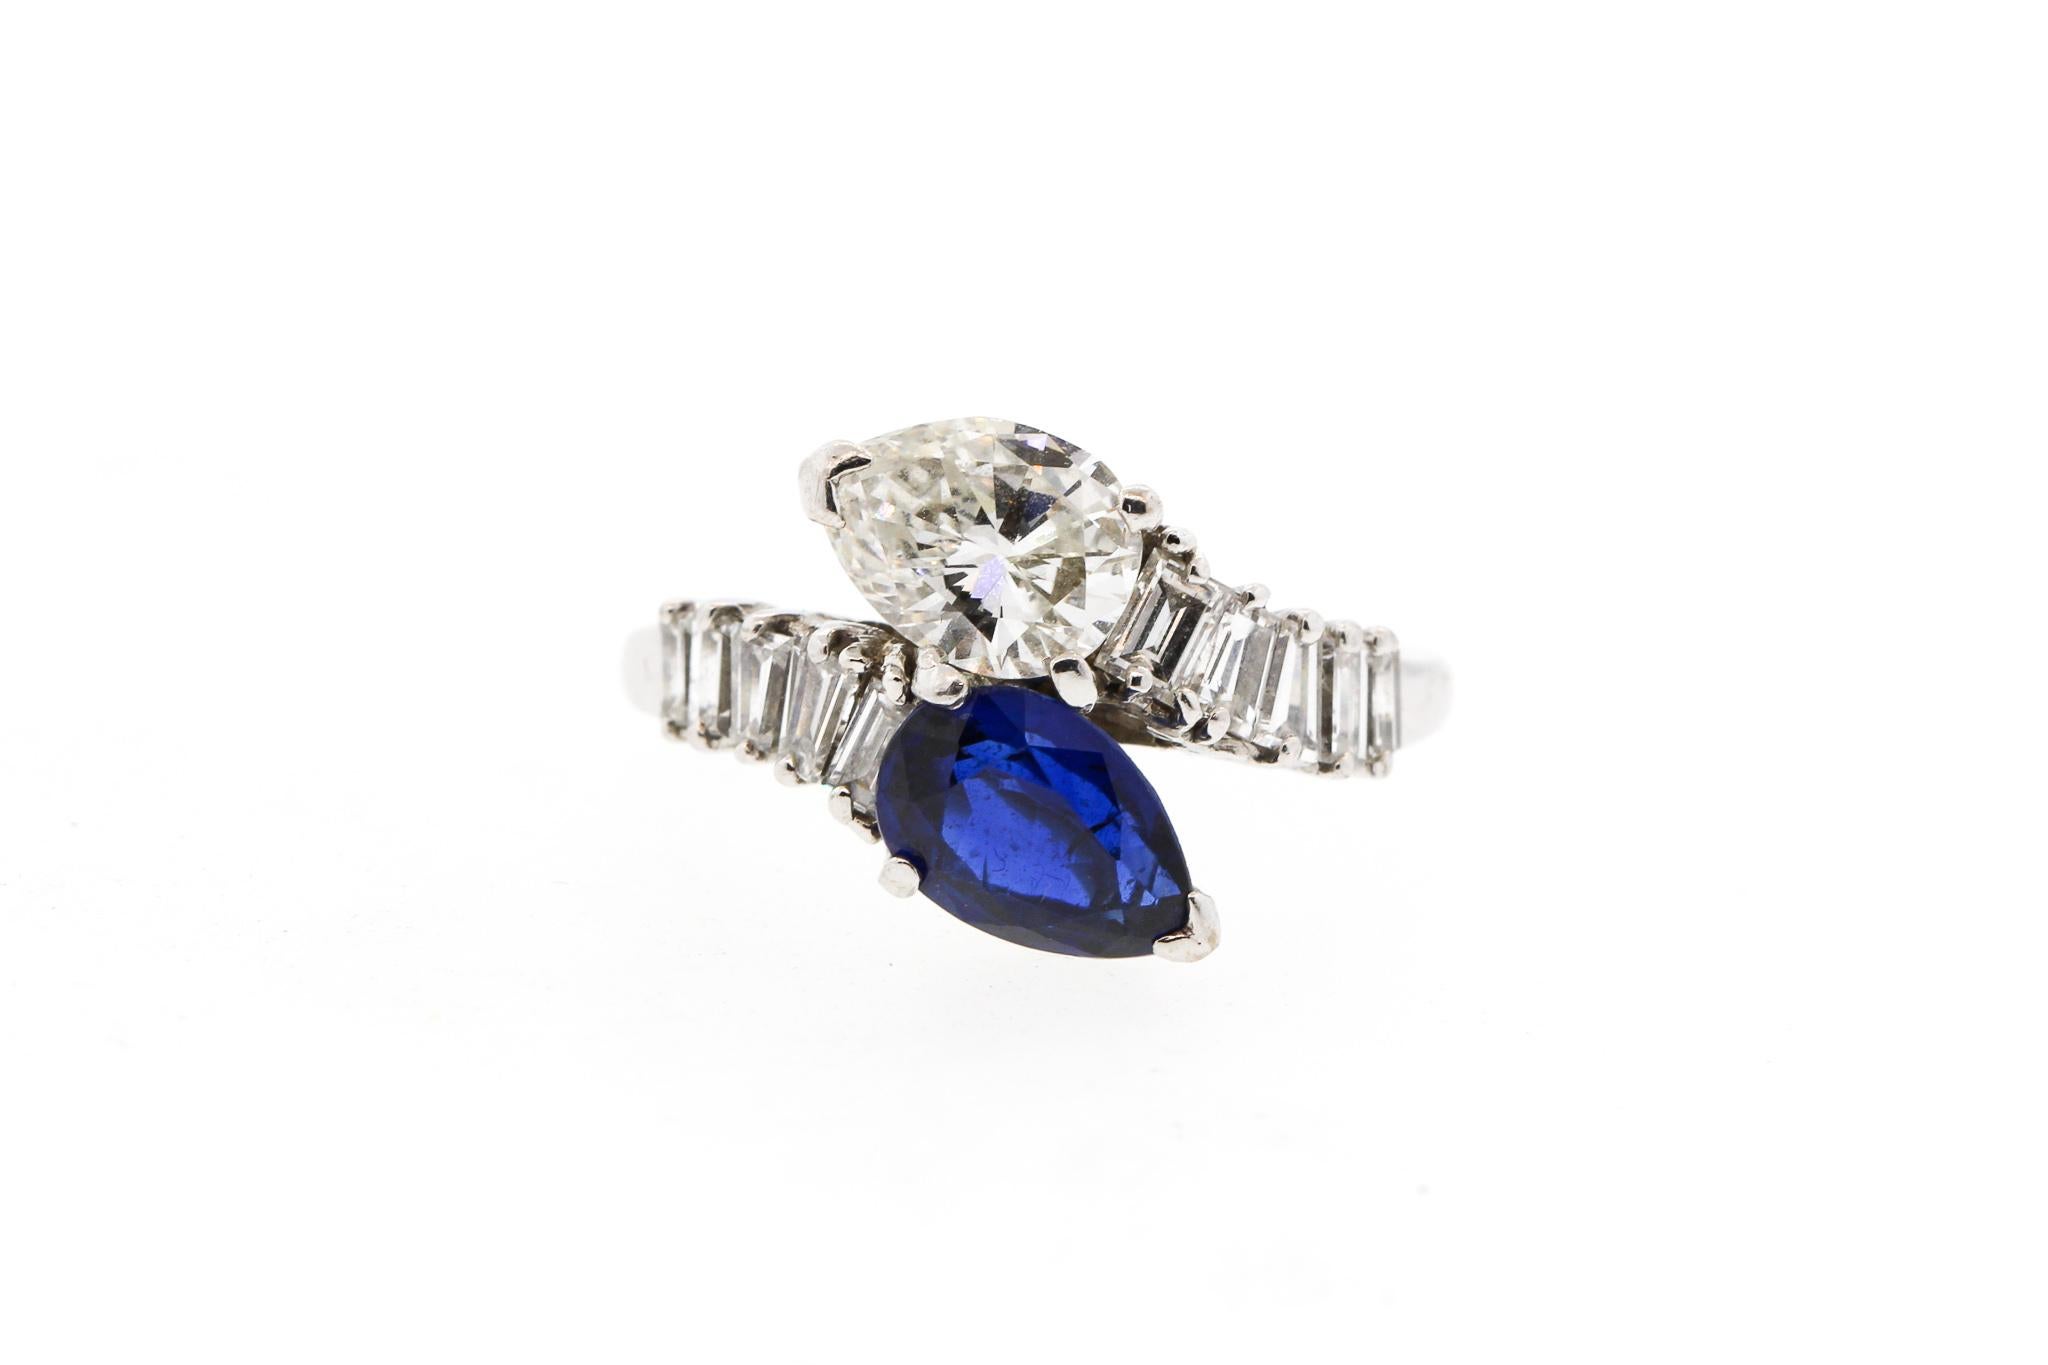 A mid-century platinum sapphire and diamond bypass ring, circa 1960. The ring is set with a white pear shape diamond weighing approximately 1.15 cts and an opposing blue sapphire weighing about the same. The diamond is very clean and white,